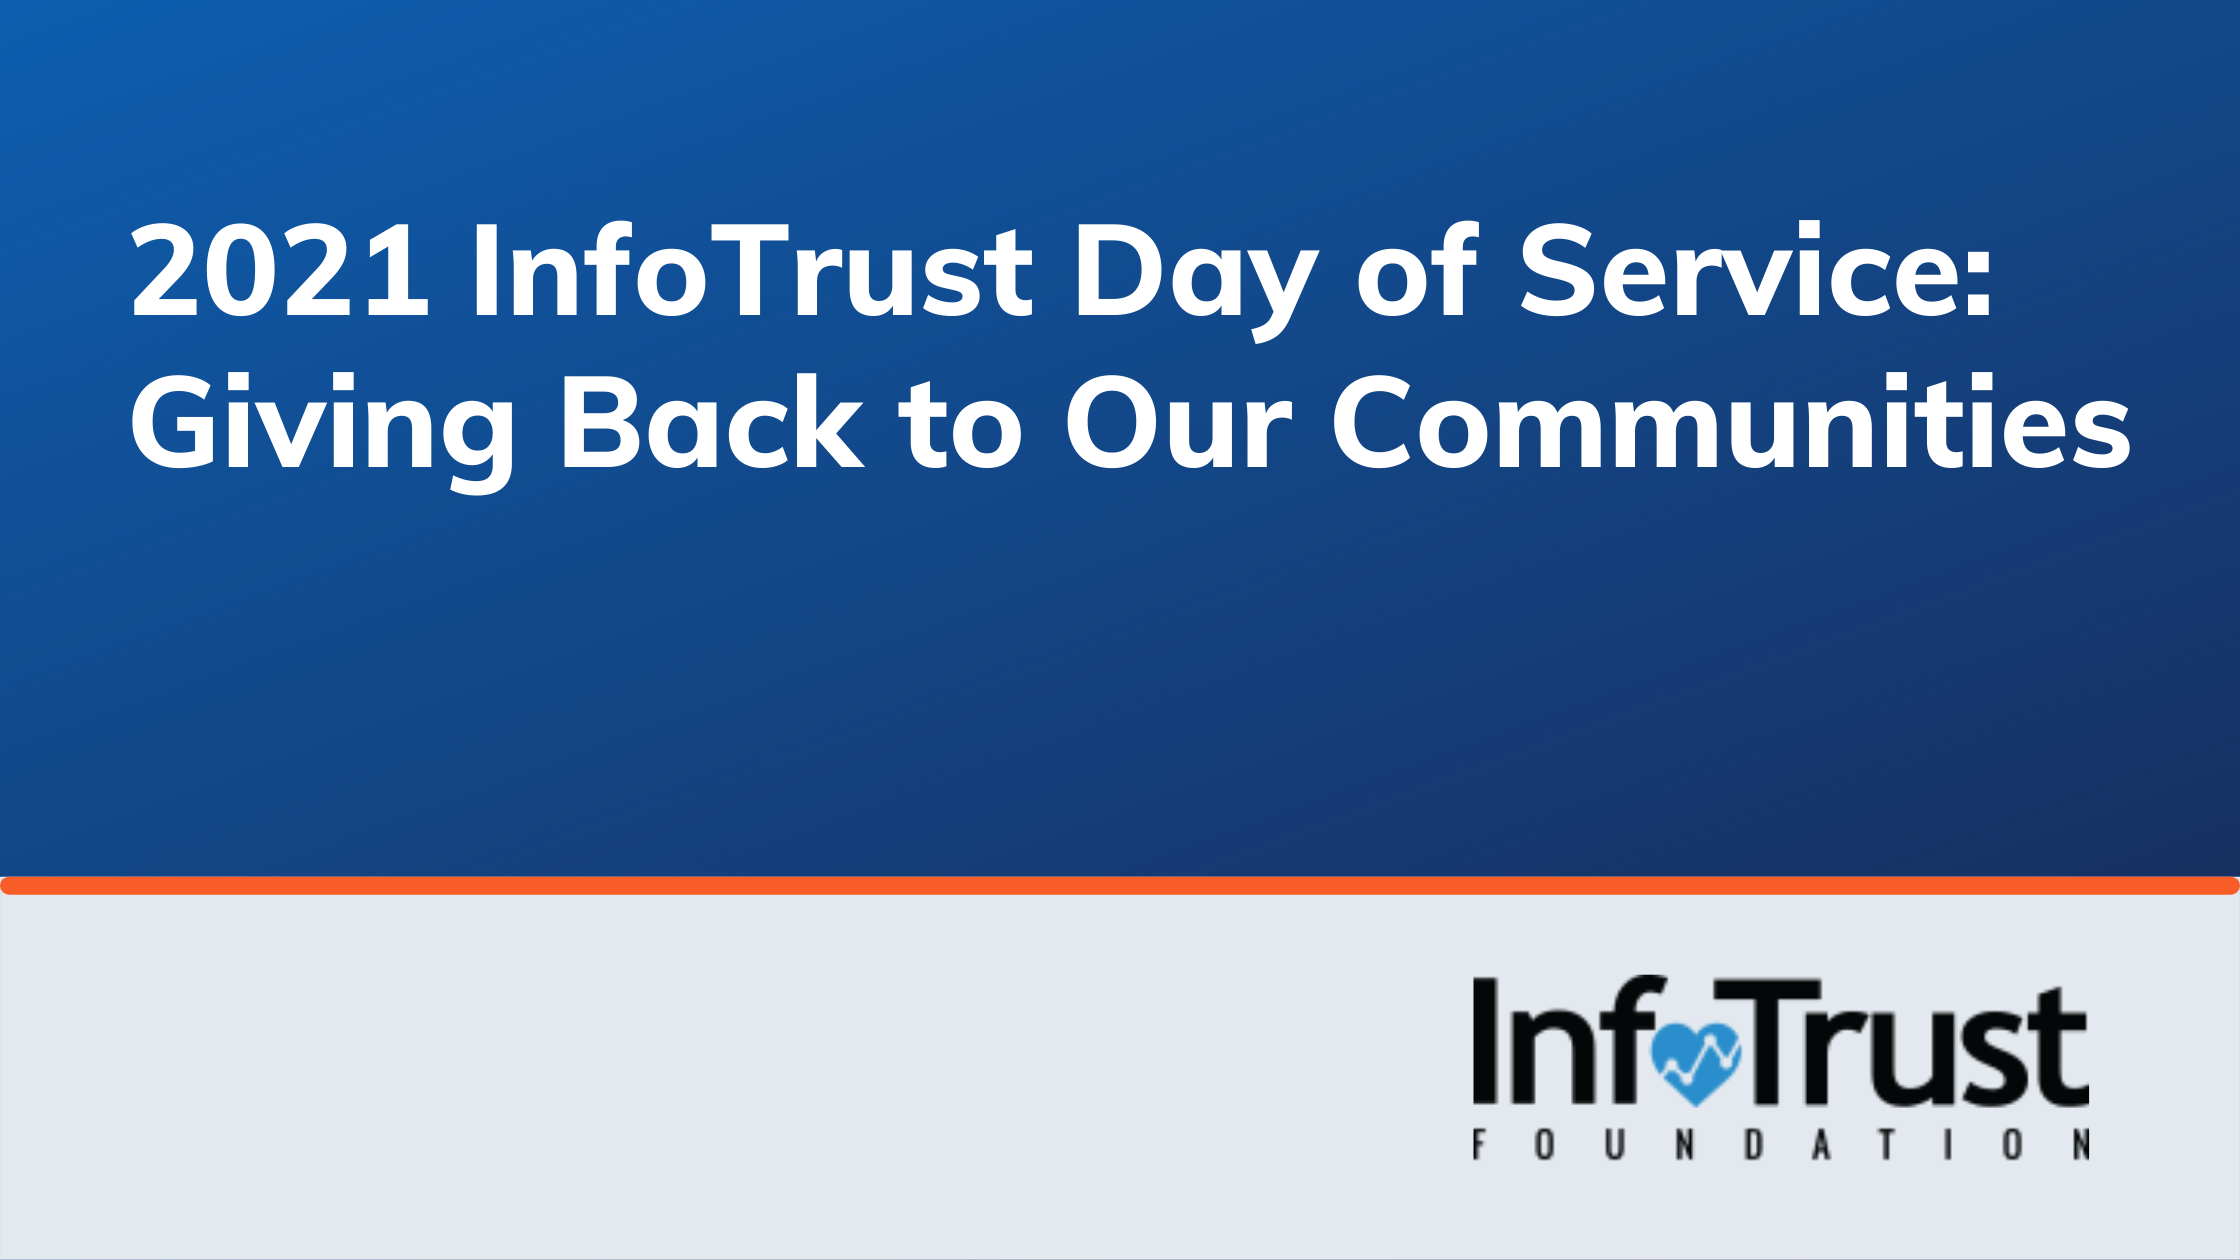 2021 InfoTrust Day of Service: Giving Back to Our Communities